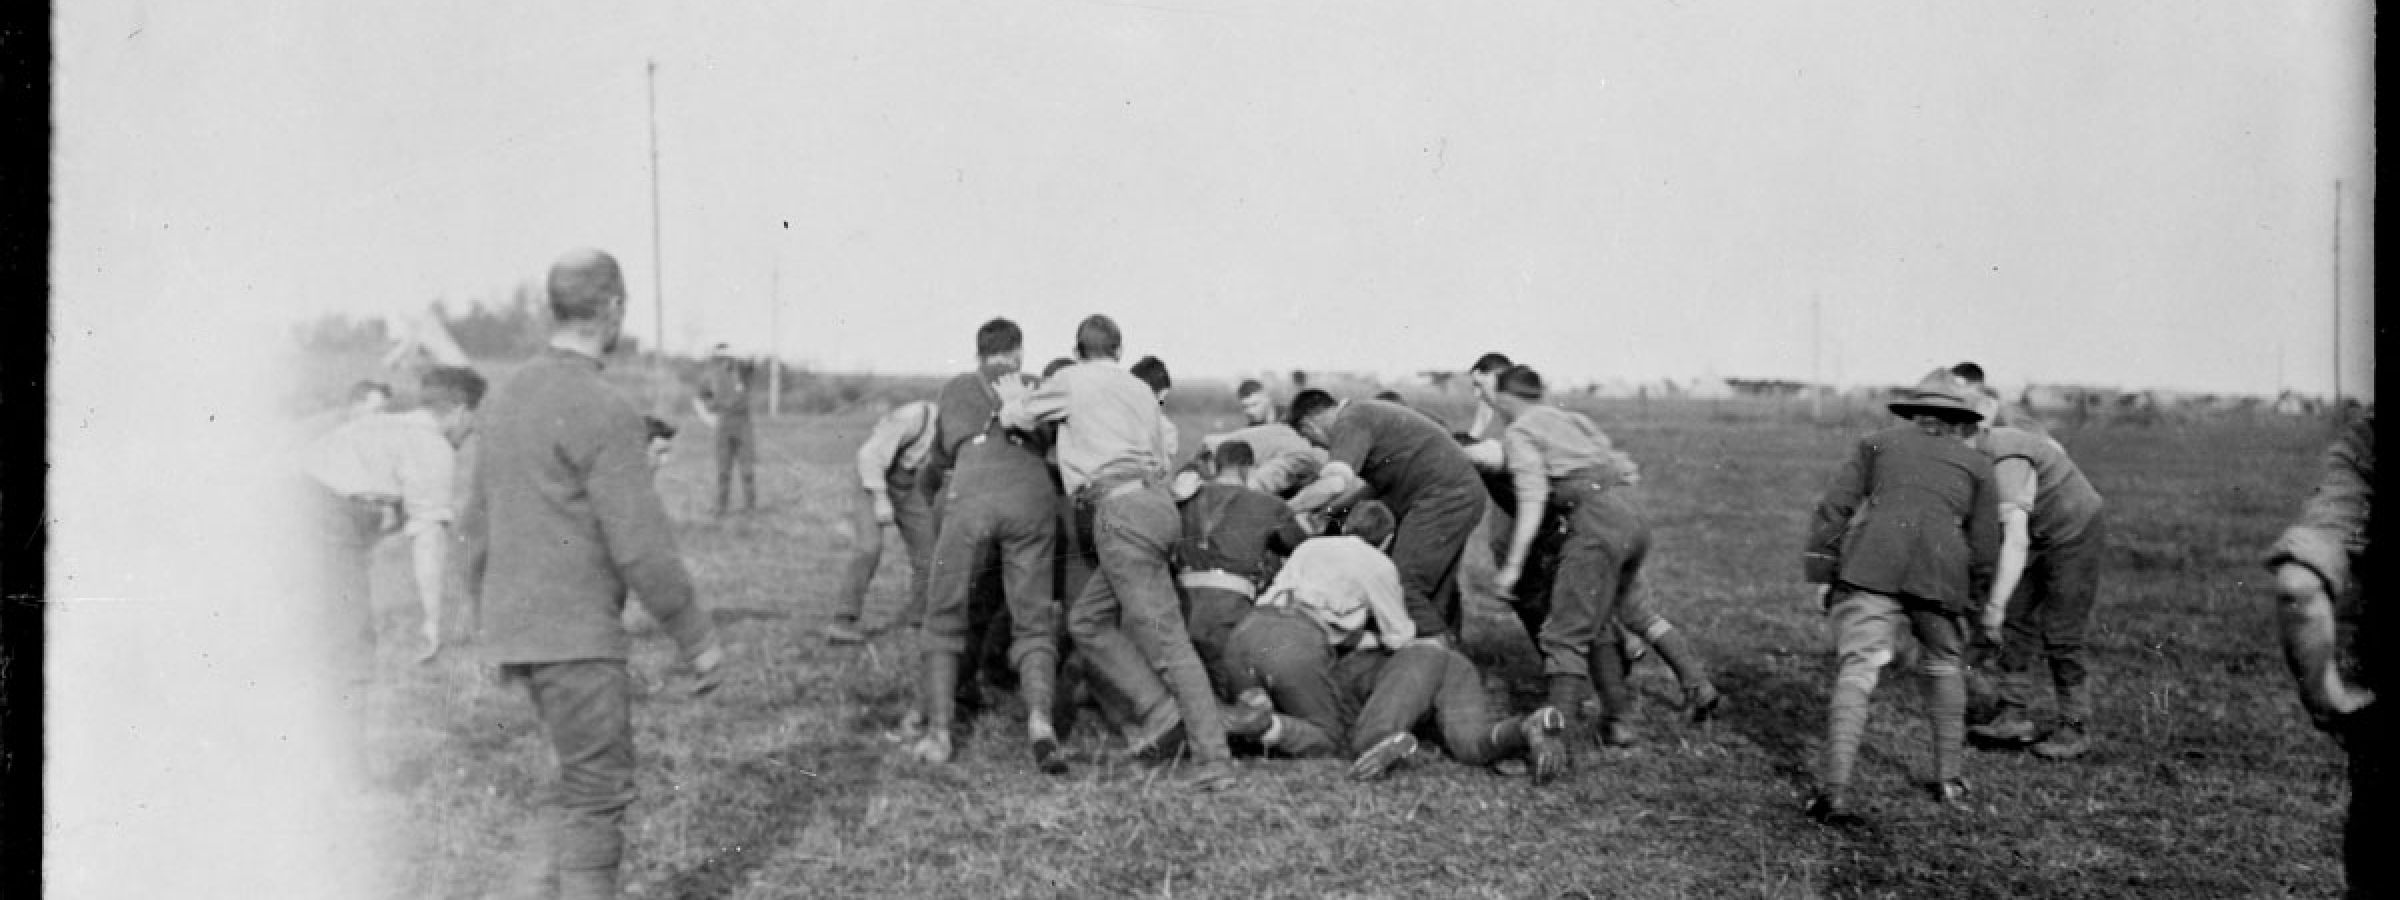 New Zealand soldiers playing a game of rugby at Fontaine, 12 October 1918.